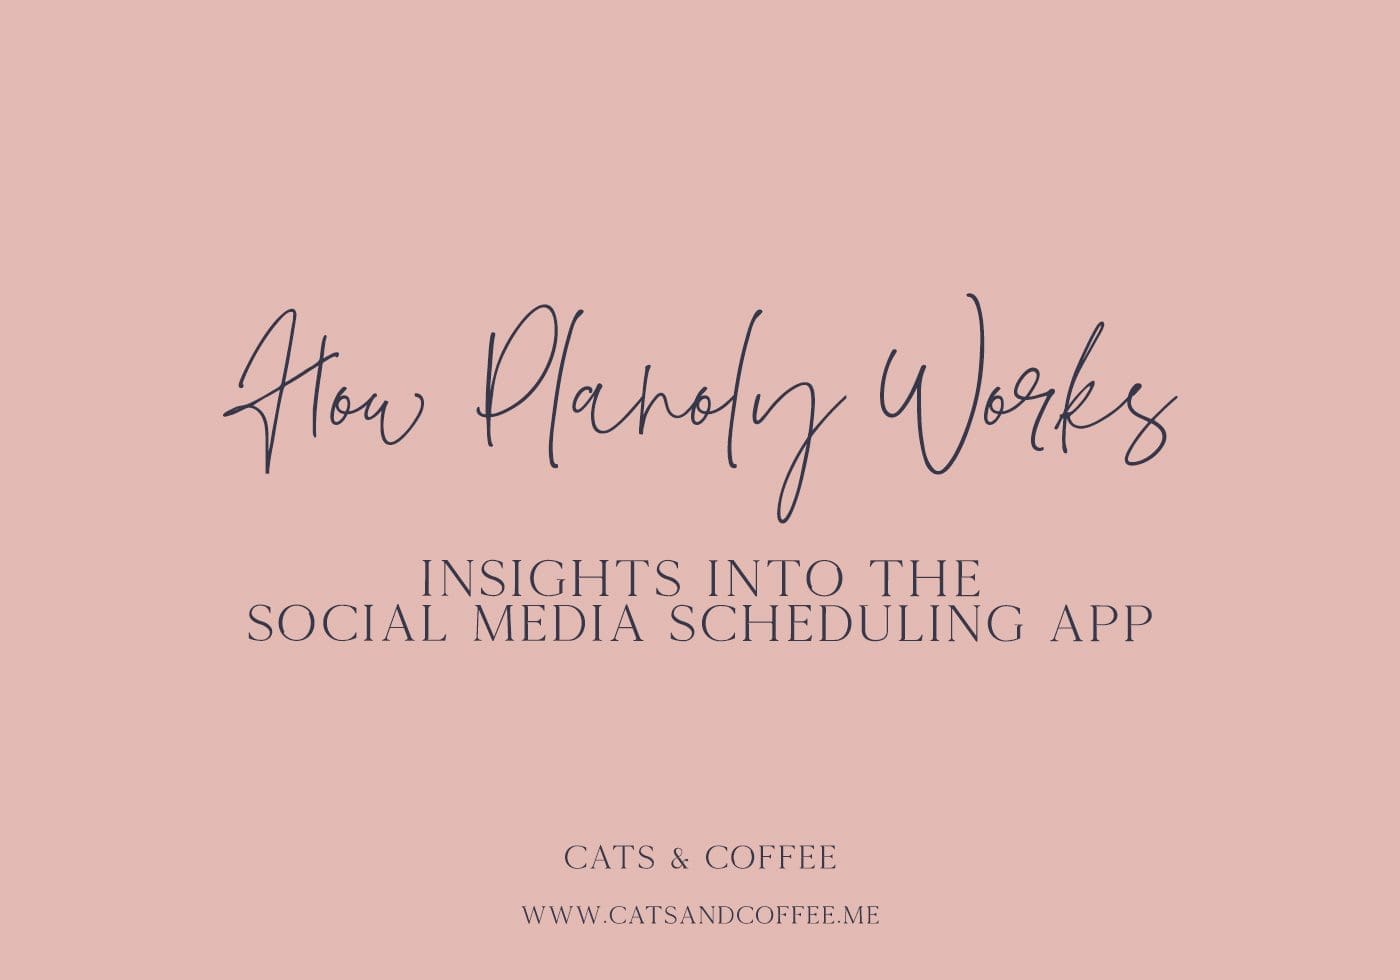 Planoly is a user-friendly visual planning tool for Instagram. Read about how Planoly works and check out my full Planoly review here!